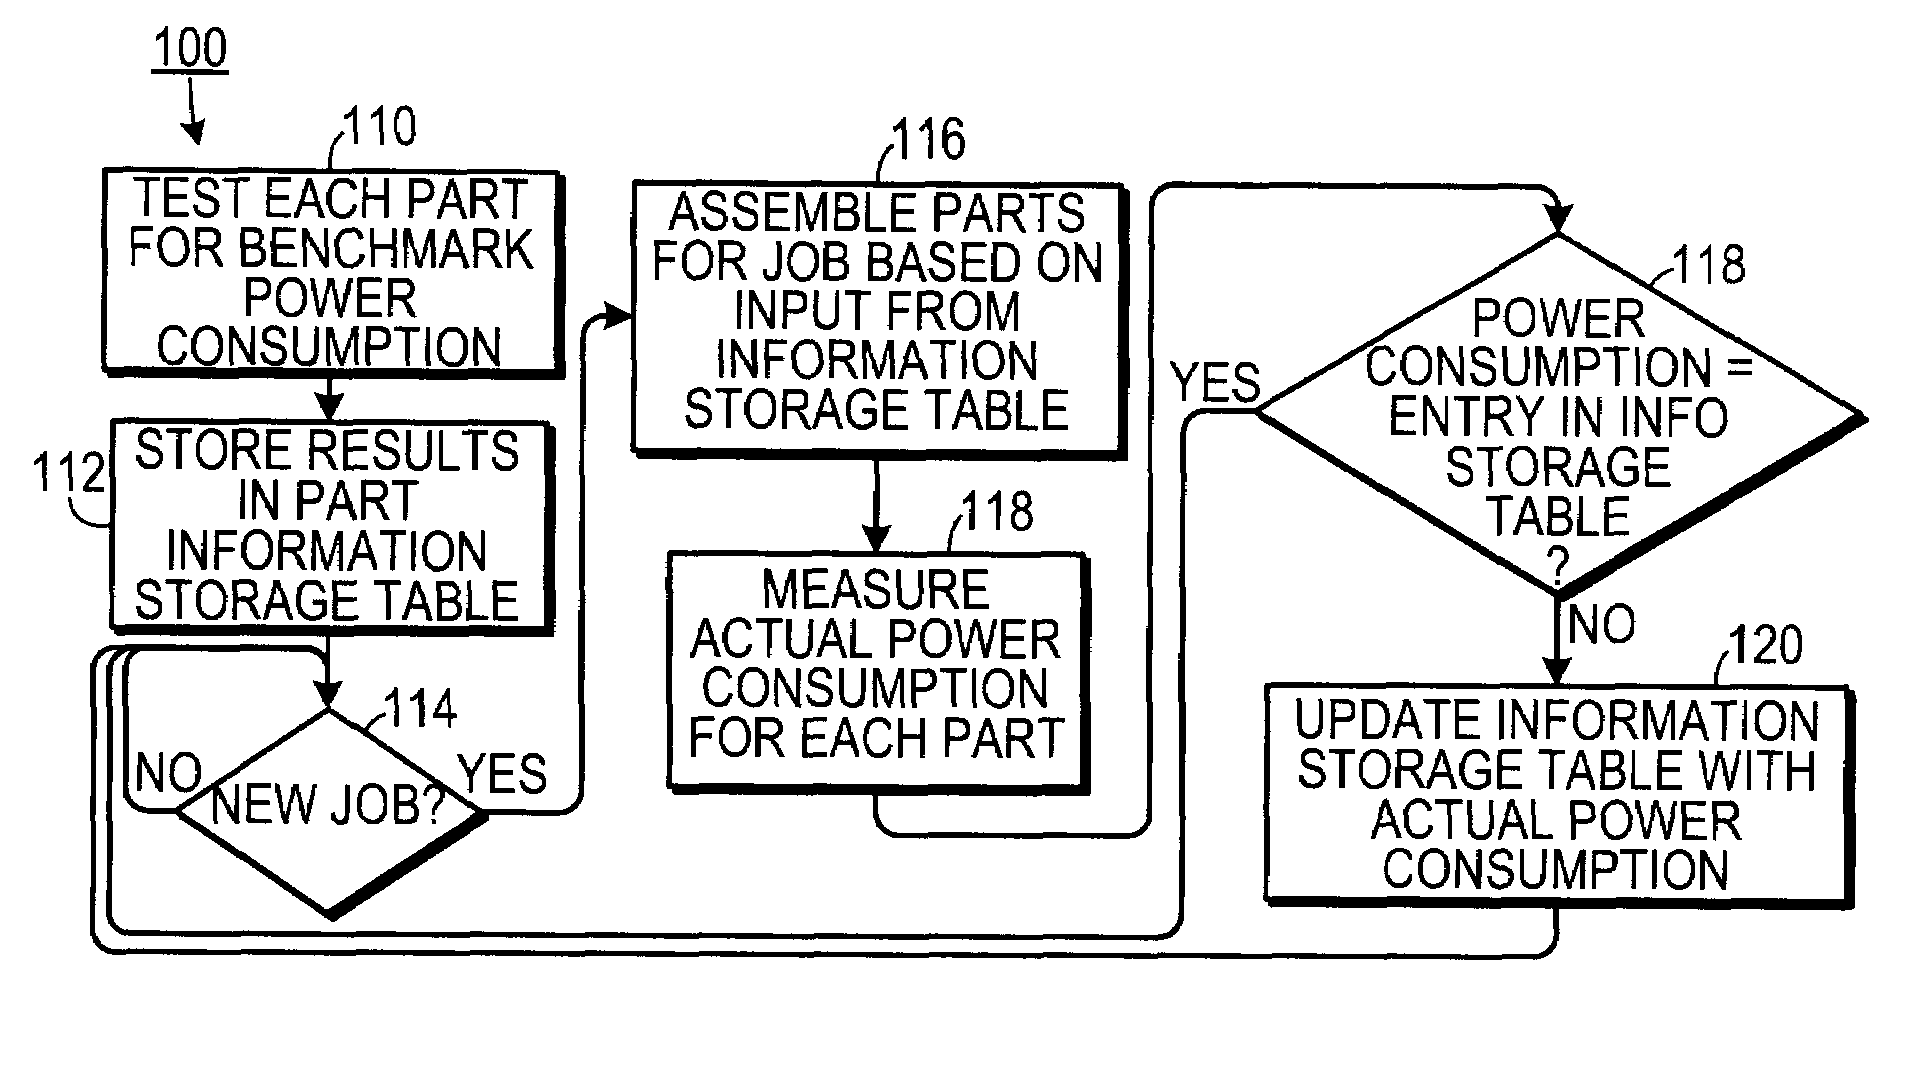 Selection of Processors for Job Scheduling Using Measured Power Consumption Ratings